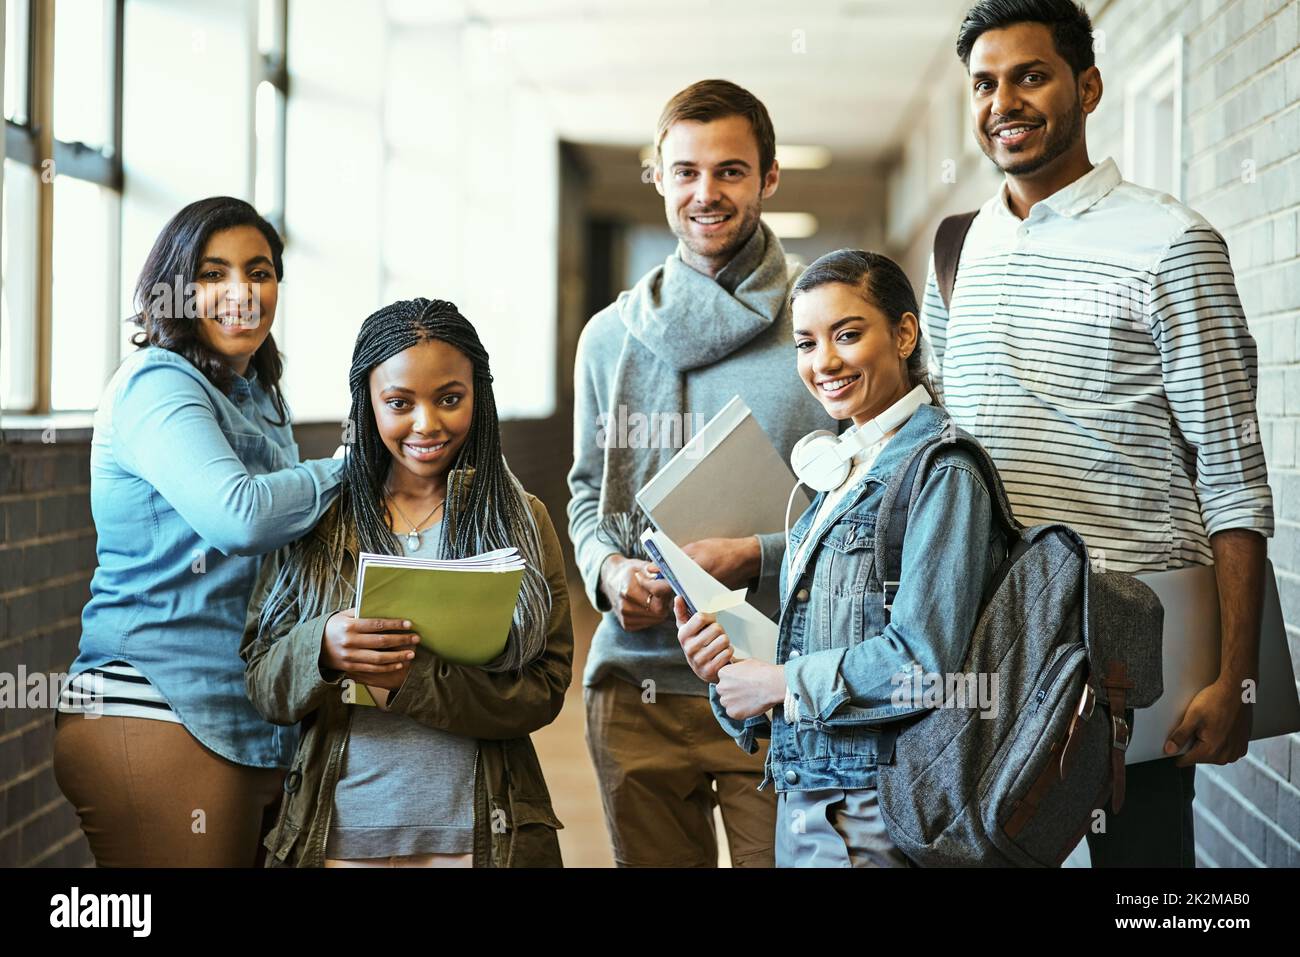 Campus clique. Cropped portrait of a group of university students standing in a campus corridor. Stock Photo